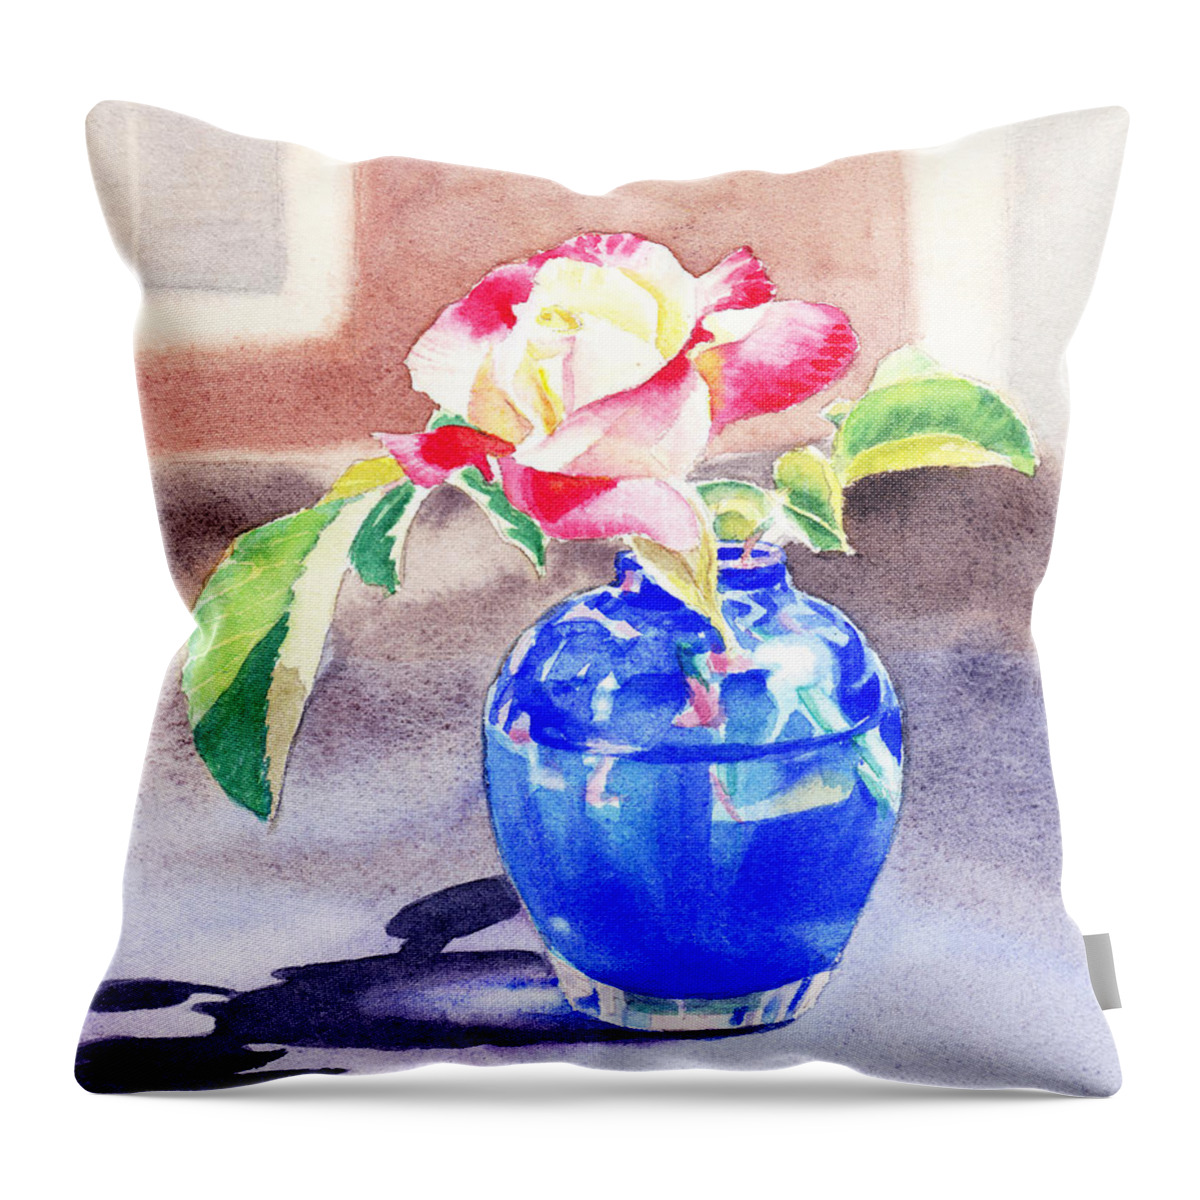 Rose Throw Pillow featuring the painting Rose in the Blue Vase by Irina Sztukowski